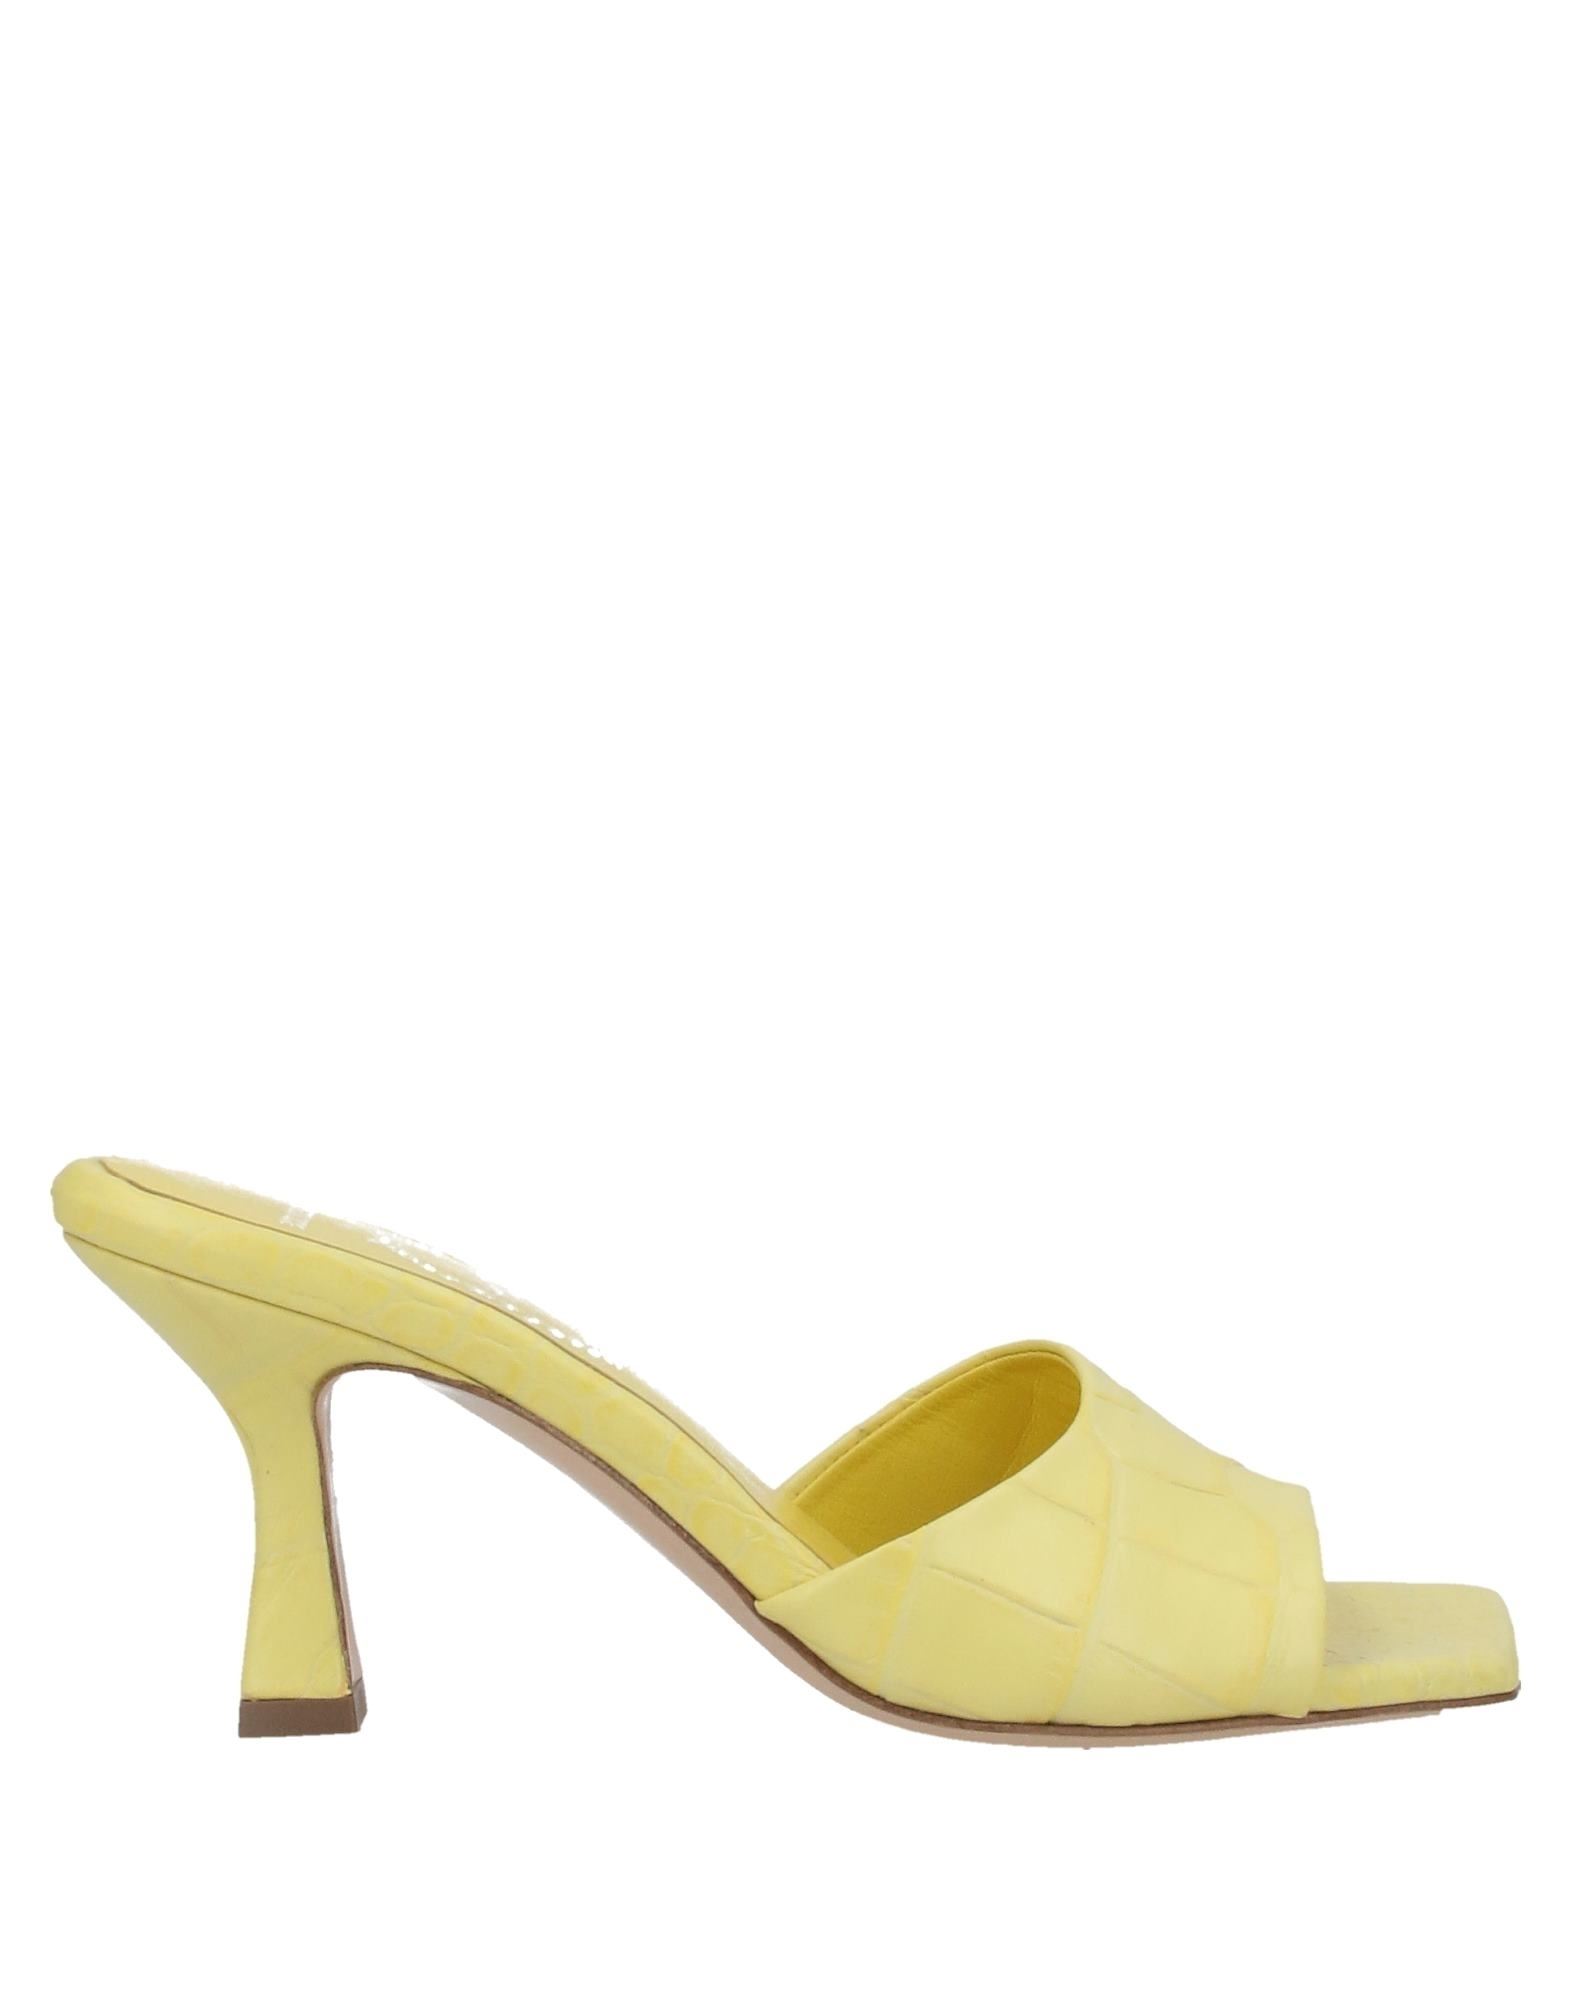 Aldo Castagna For Shabby Chic Sandals In Yellow